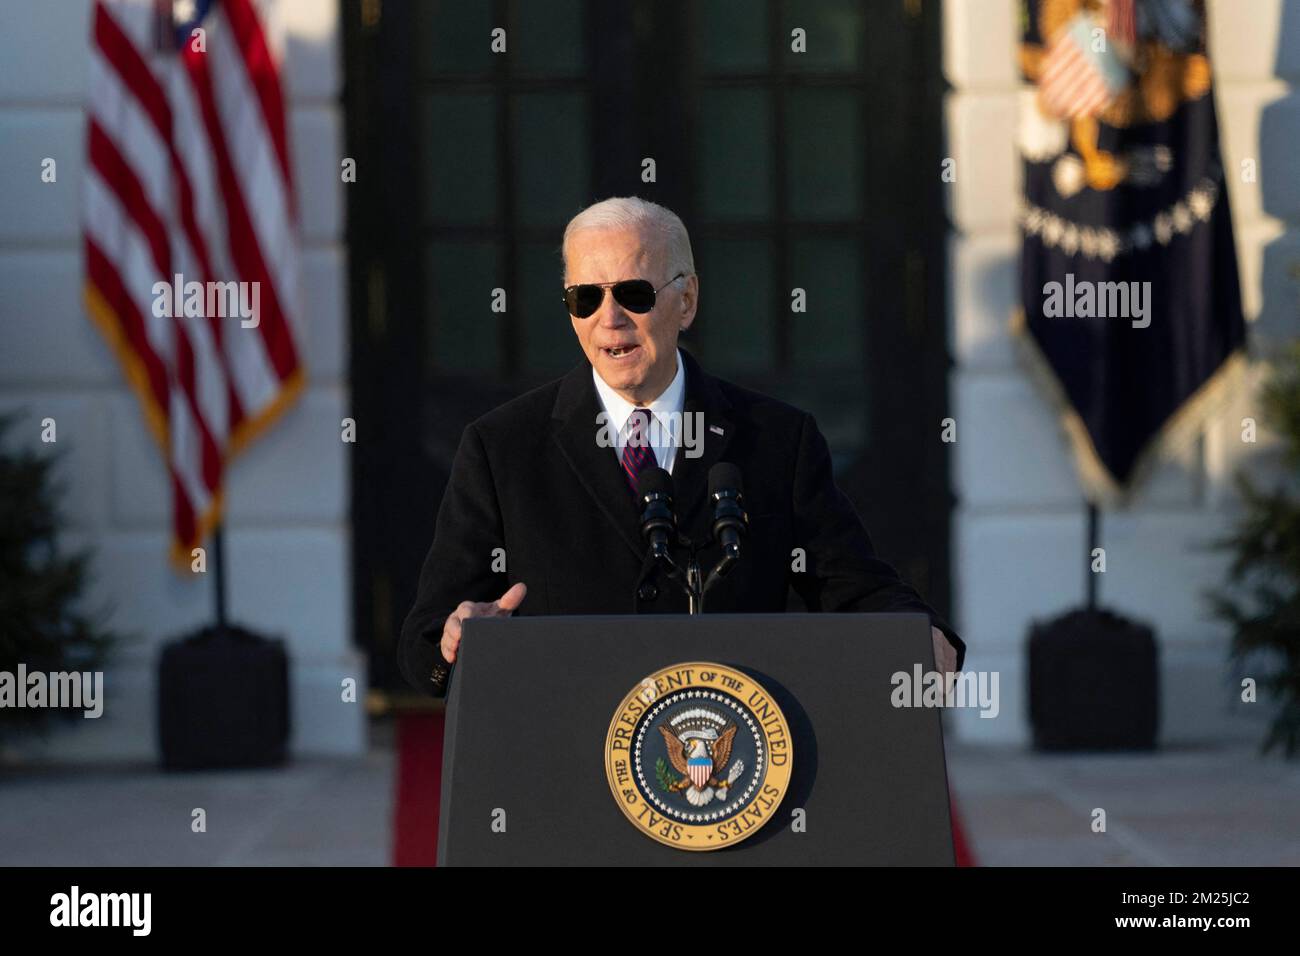 United States President Joe Biden hosts a ceremony to sign the Respect for Marriage Act on the South Lawn of the White House in Washington, DC on Tuesday, December 13, 2022. Credit: Chris Kleponis / Pool via CNP Stock Photo